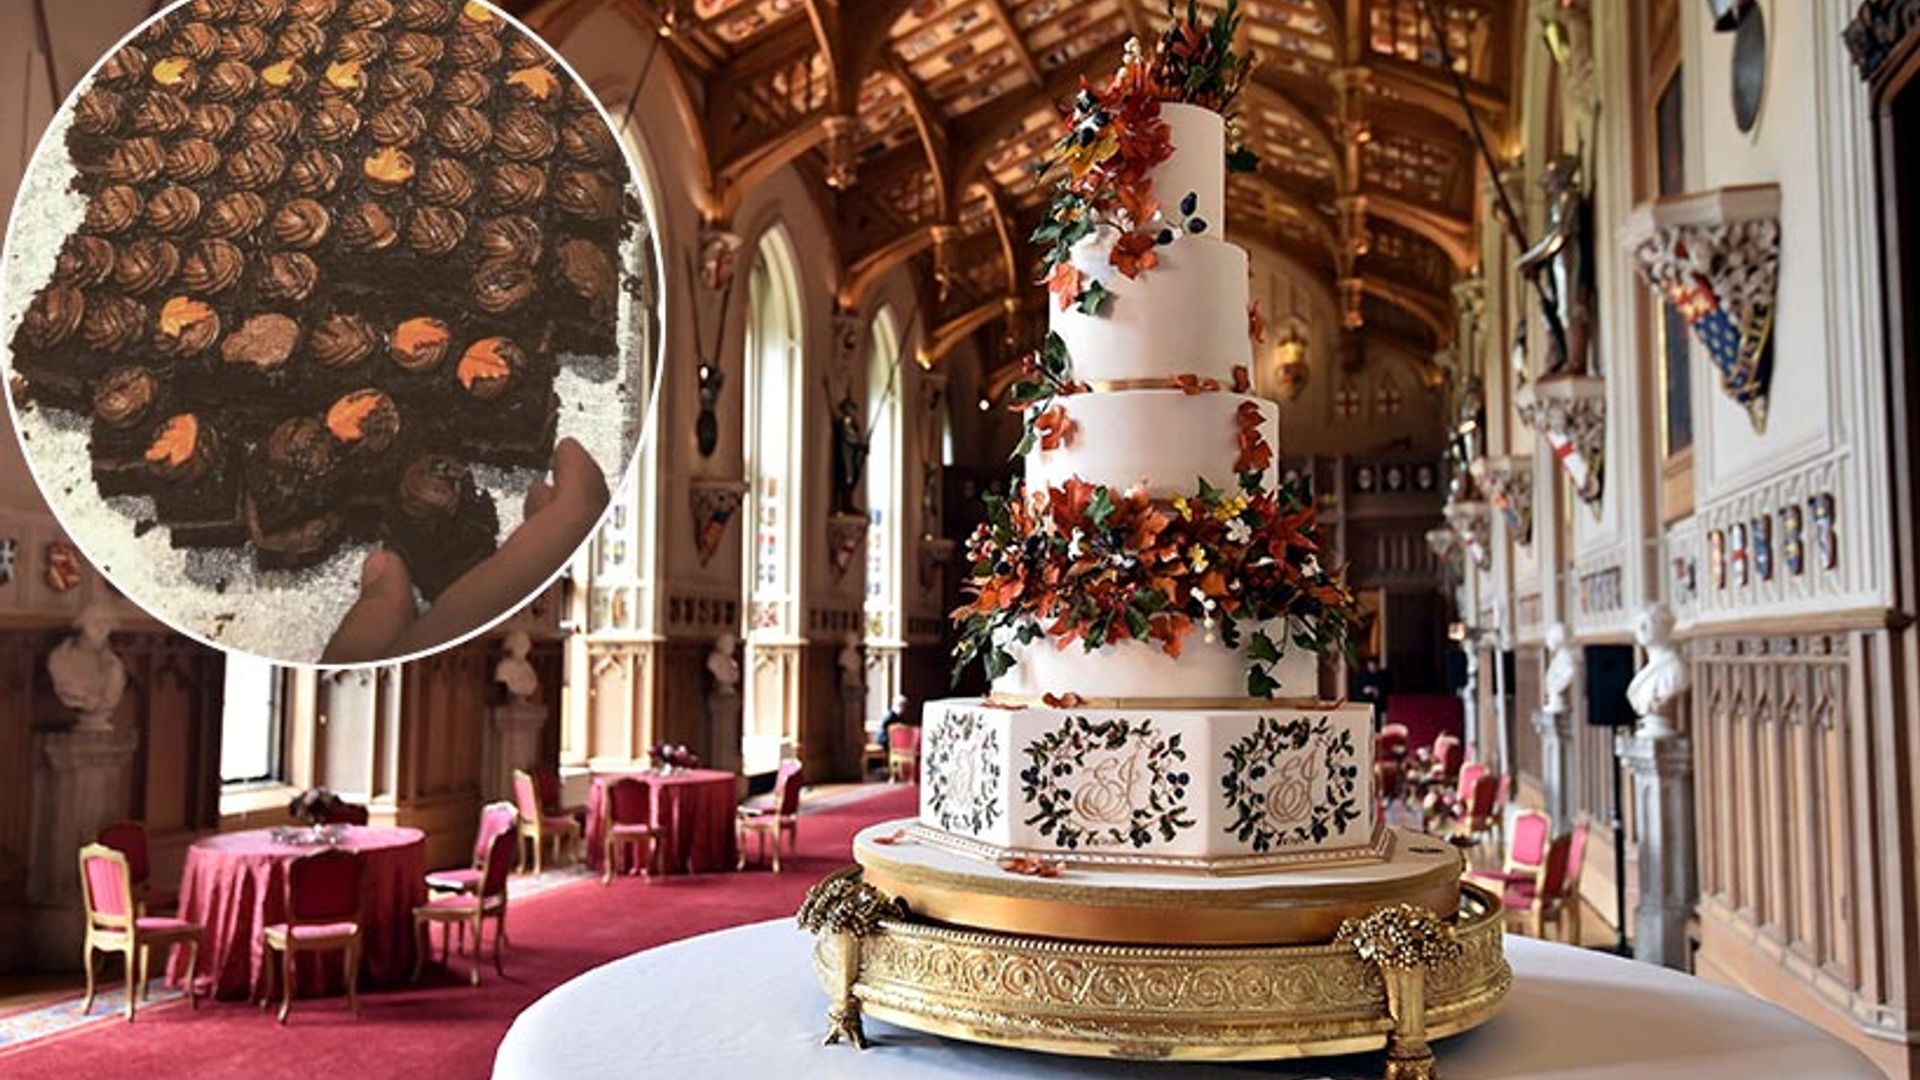 How Eugenie's royal wedding cake was served at evening reception – you'll be surprised!